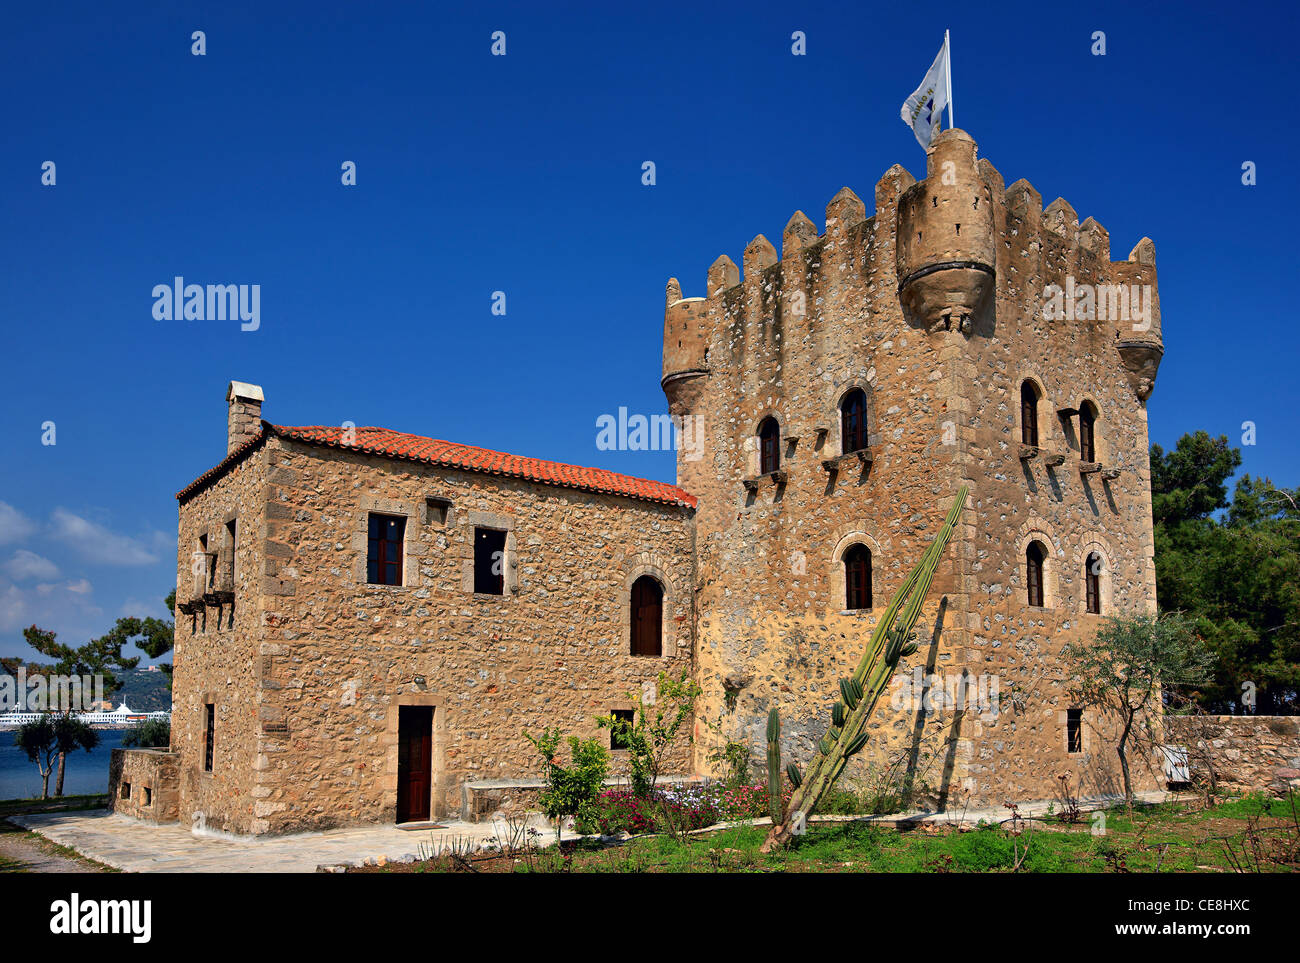 The Tower of Tzanetakis in Gythio, Peloponnese, Greece. Today it hosts the Historical and Ethnological Museum of Mani. Stock Photo